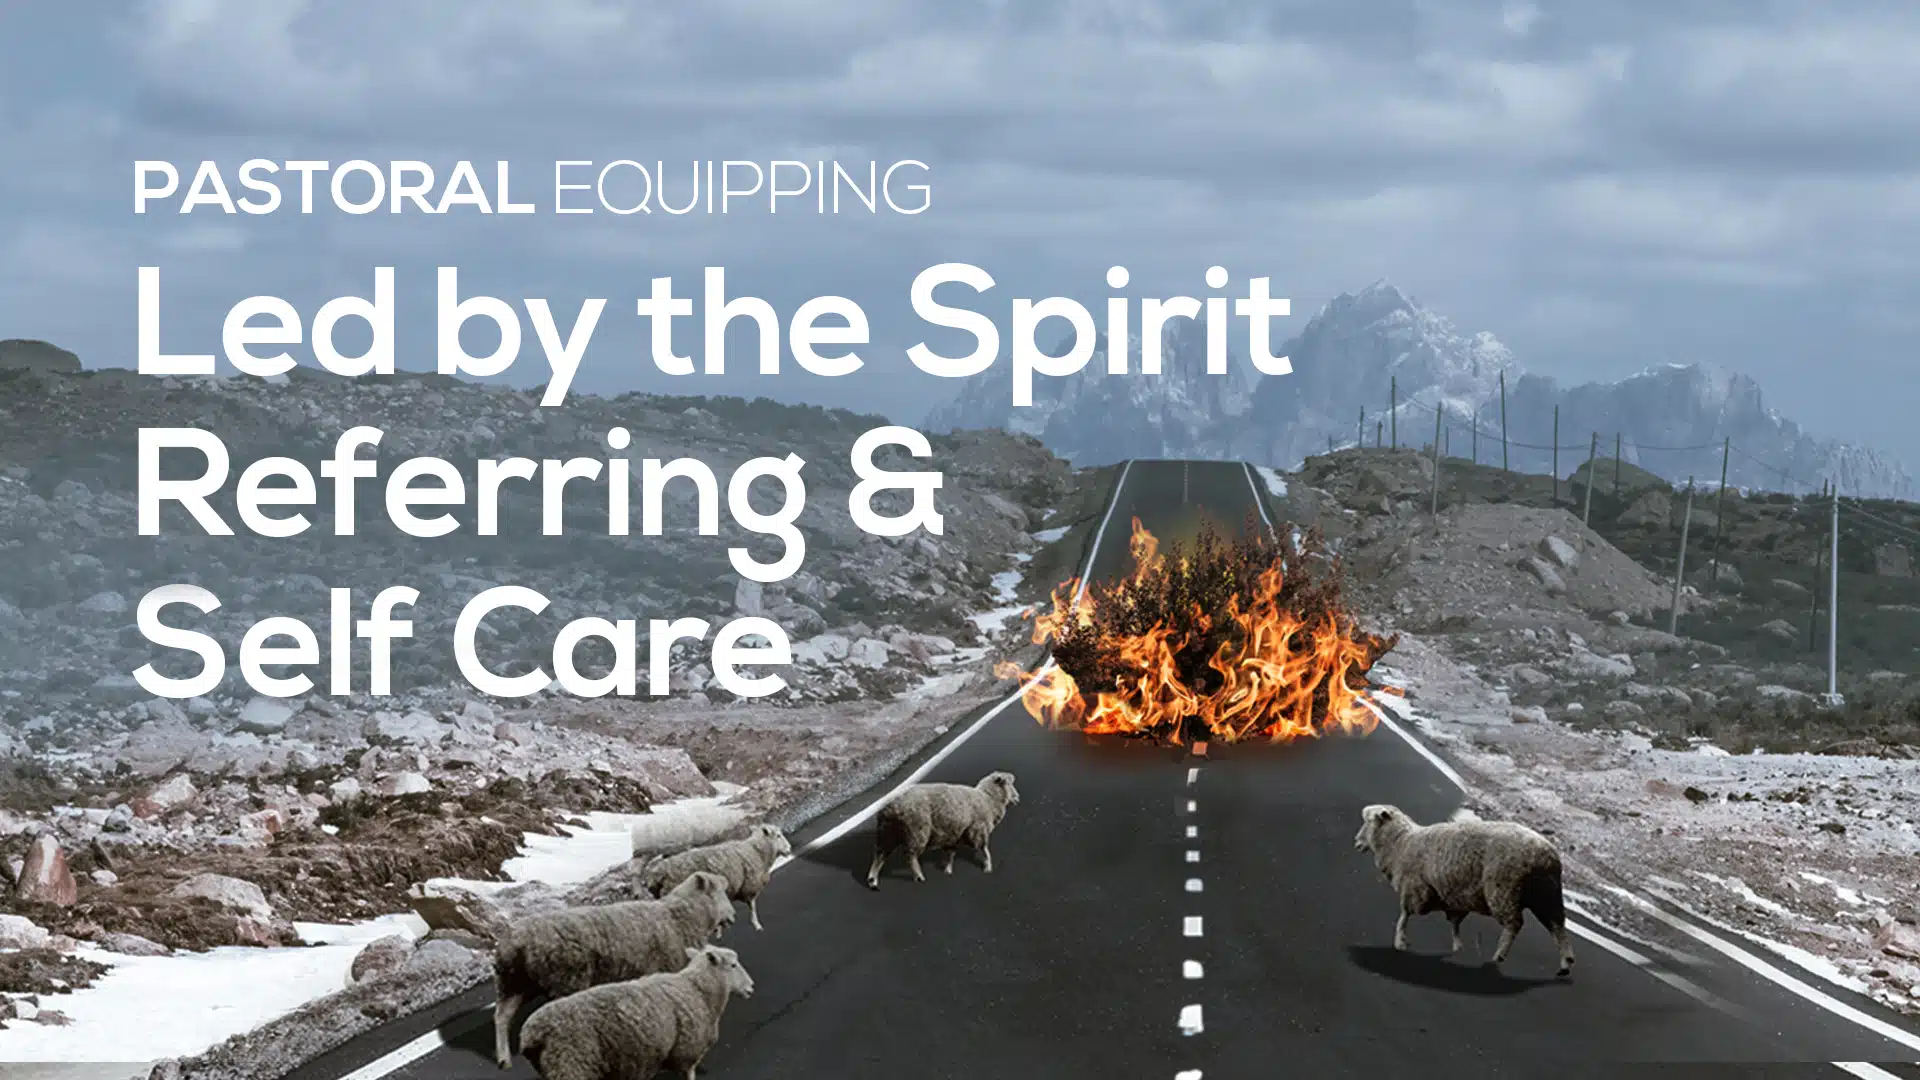 Video image for ‘Let by the Spirit, Referring & Self Care’